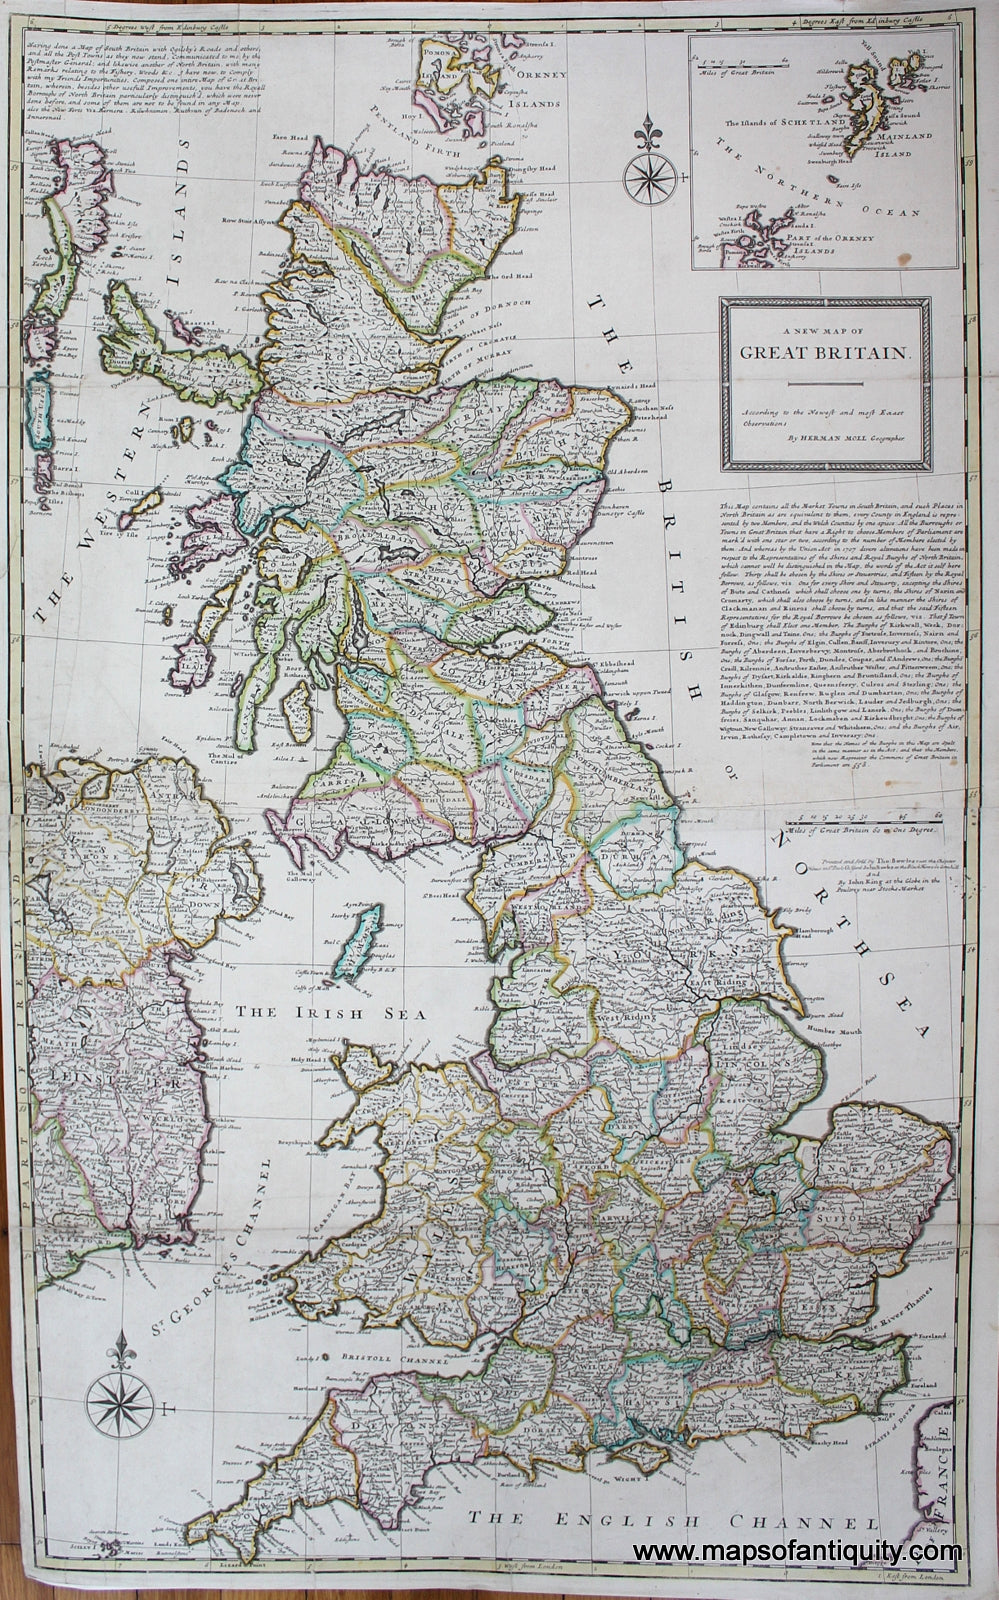 Antique-Hand-Colored-Map-A-New-Map-of-Great-Britain-United-Kingdom-England-1732-Hermann-Moll-Maps-Of-Antiquity